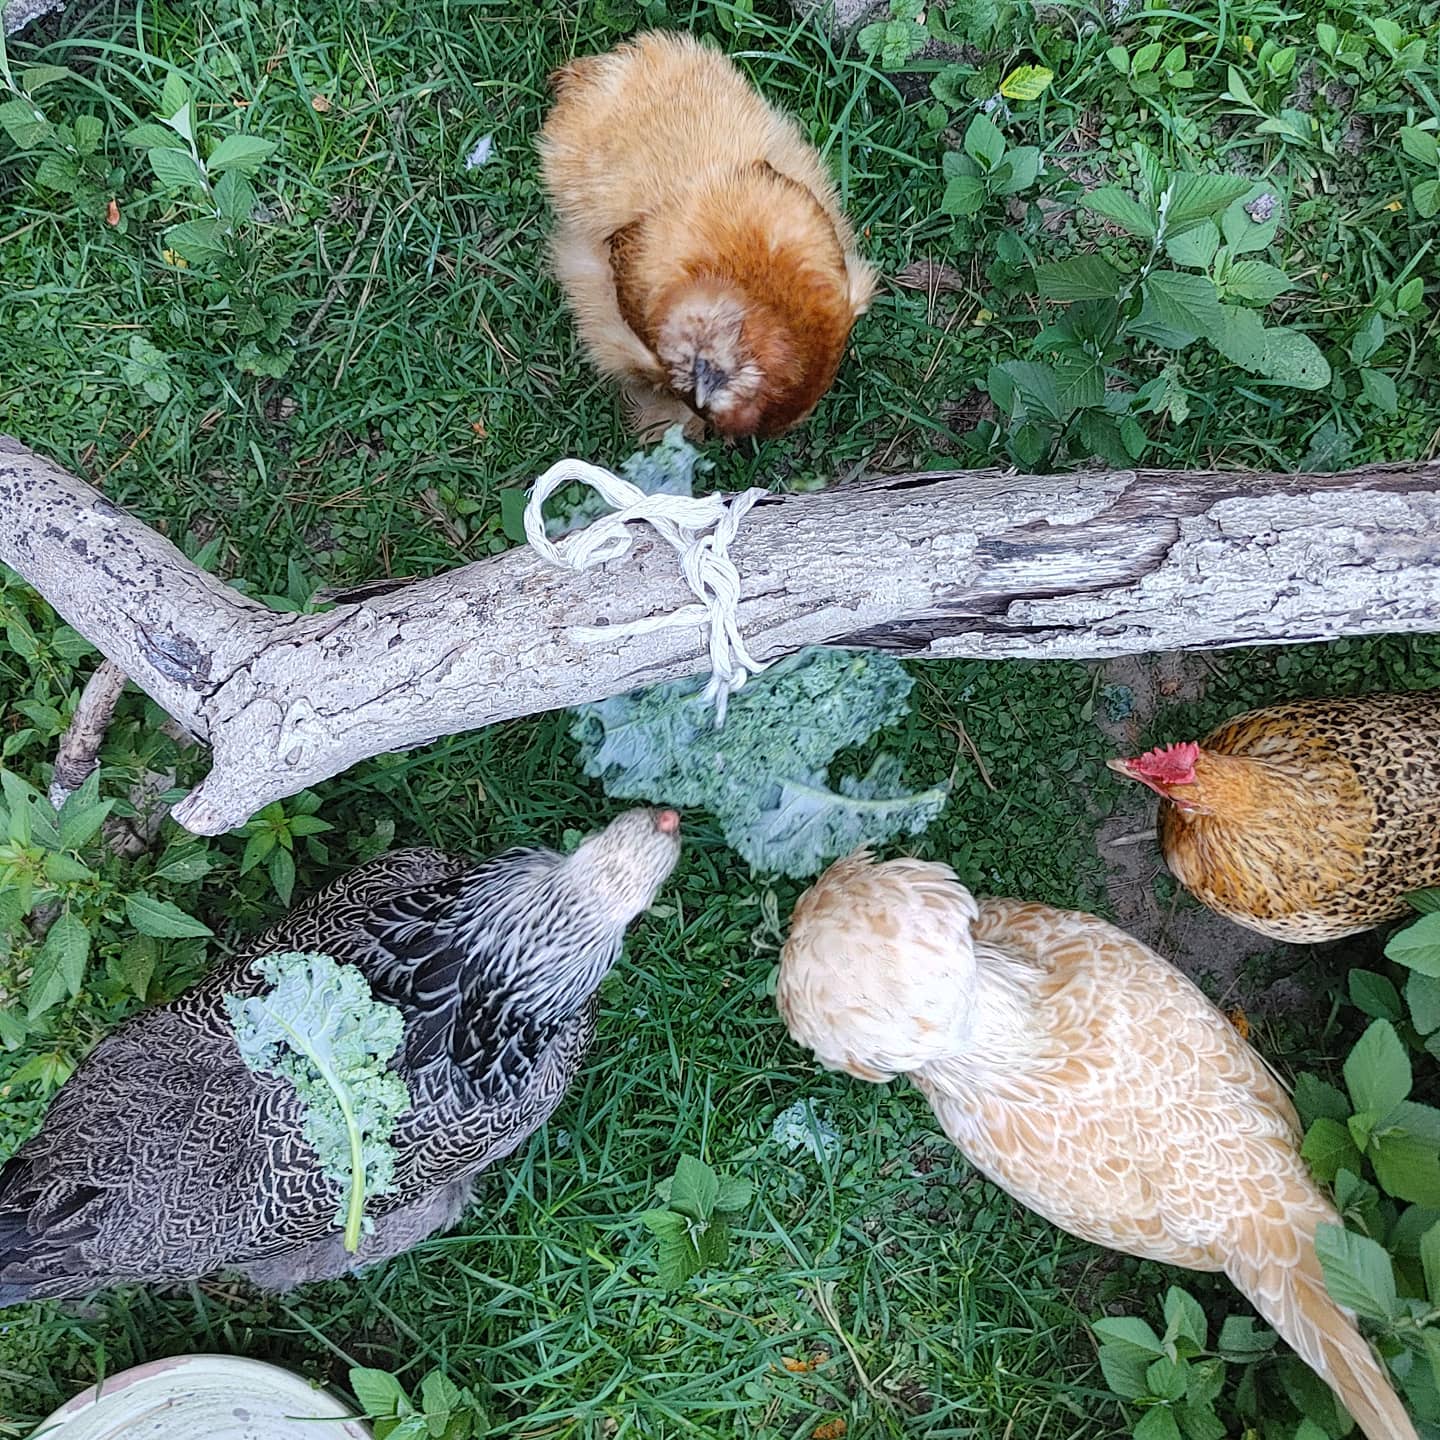 Look at Vi in the lower left. She has an entire stalk of kale on her back. Do your chickens throw things over their shoulders when foraging? I mean "foraging." Clearly no one is searching for food around here. The broodies are the best at throwing all kinds of things onto their backs while feeling nesty. Weirdos.